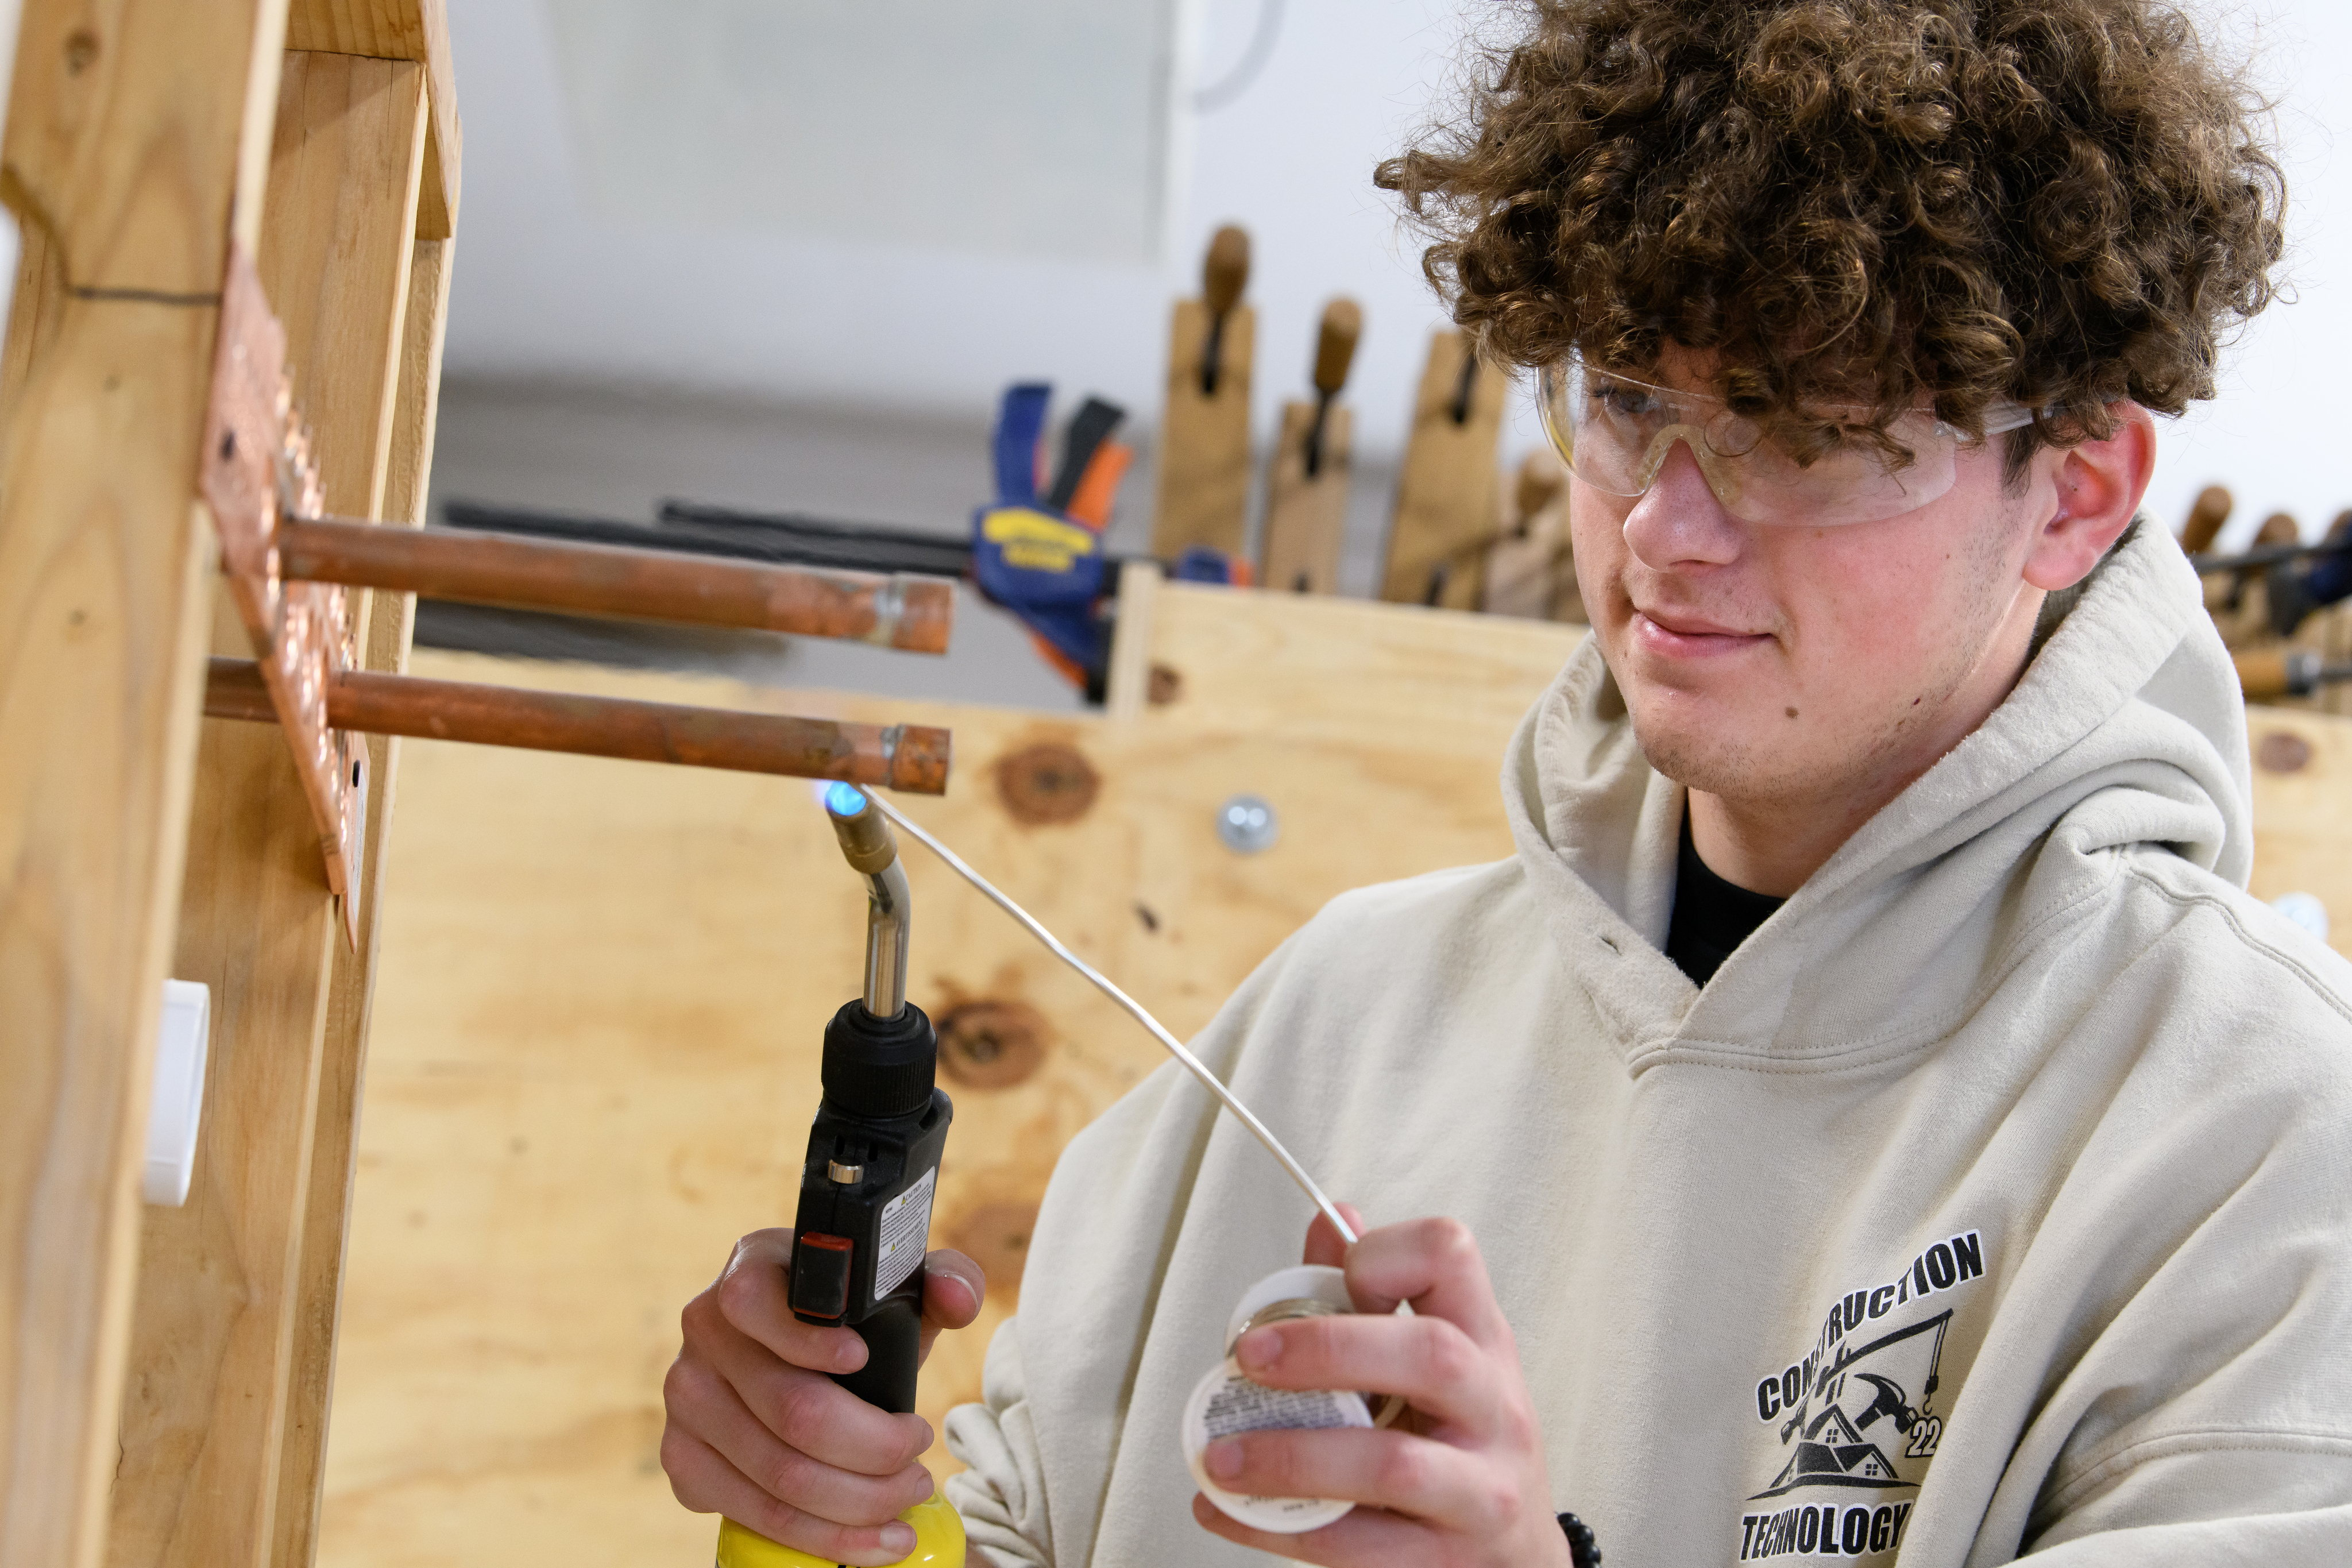 Male construction student uses heat to sodder plumbing materials together.